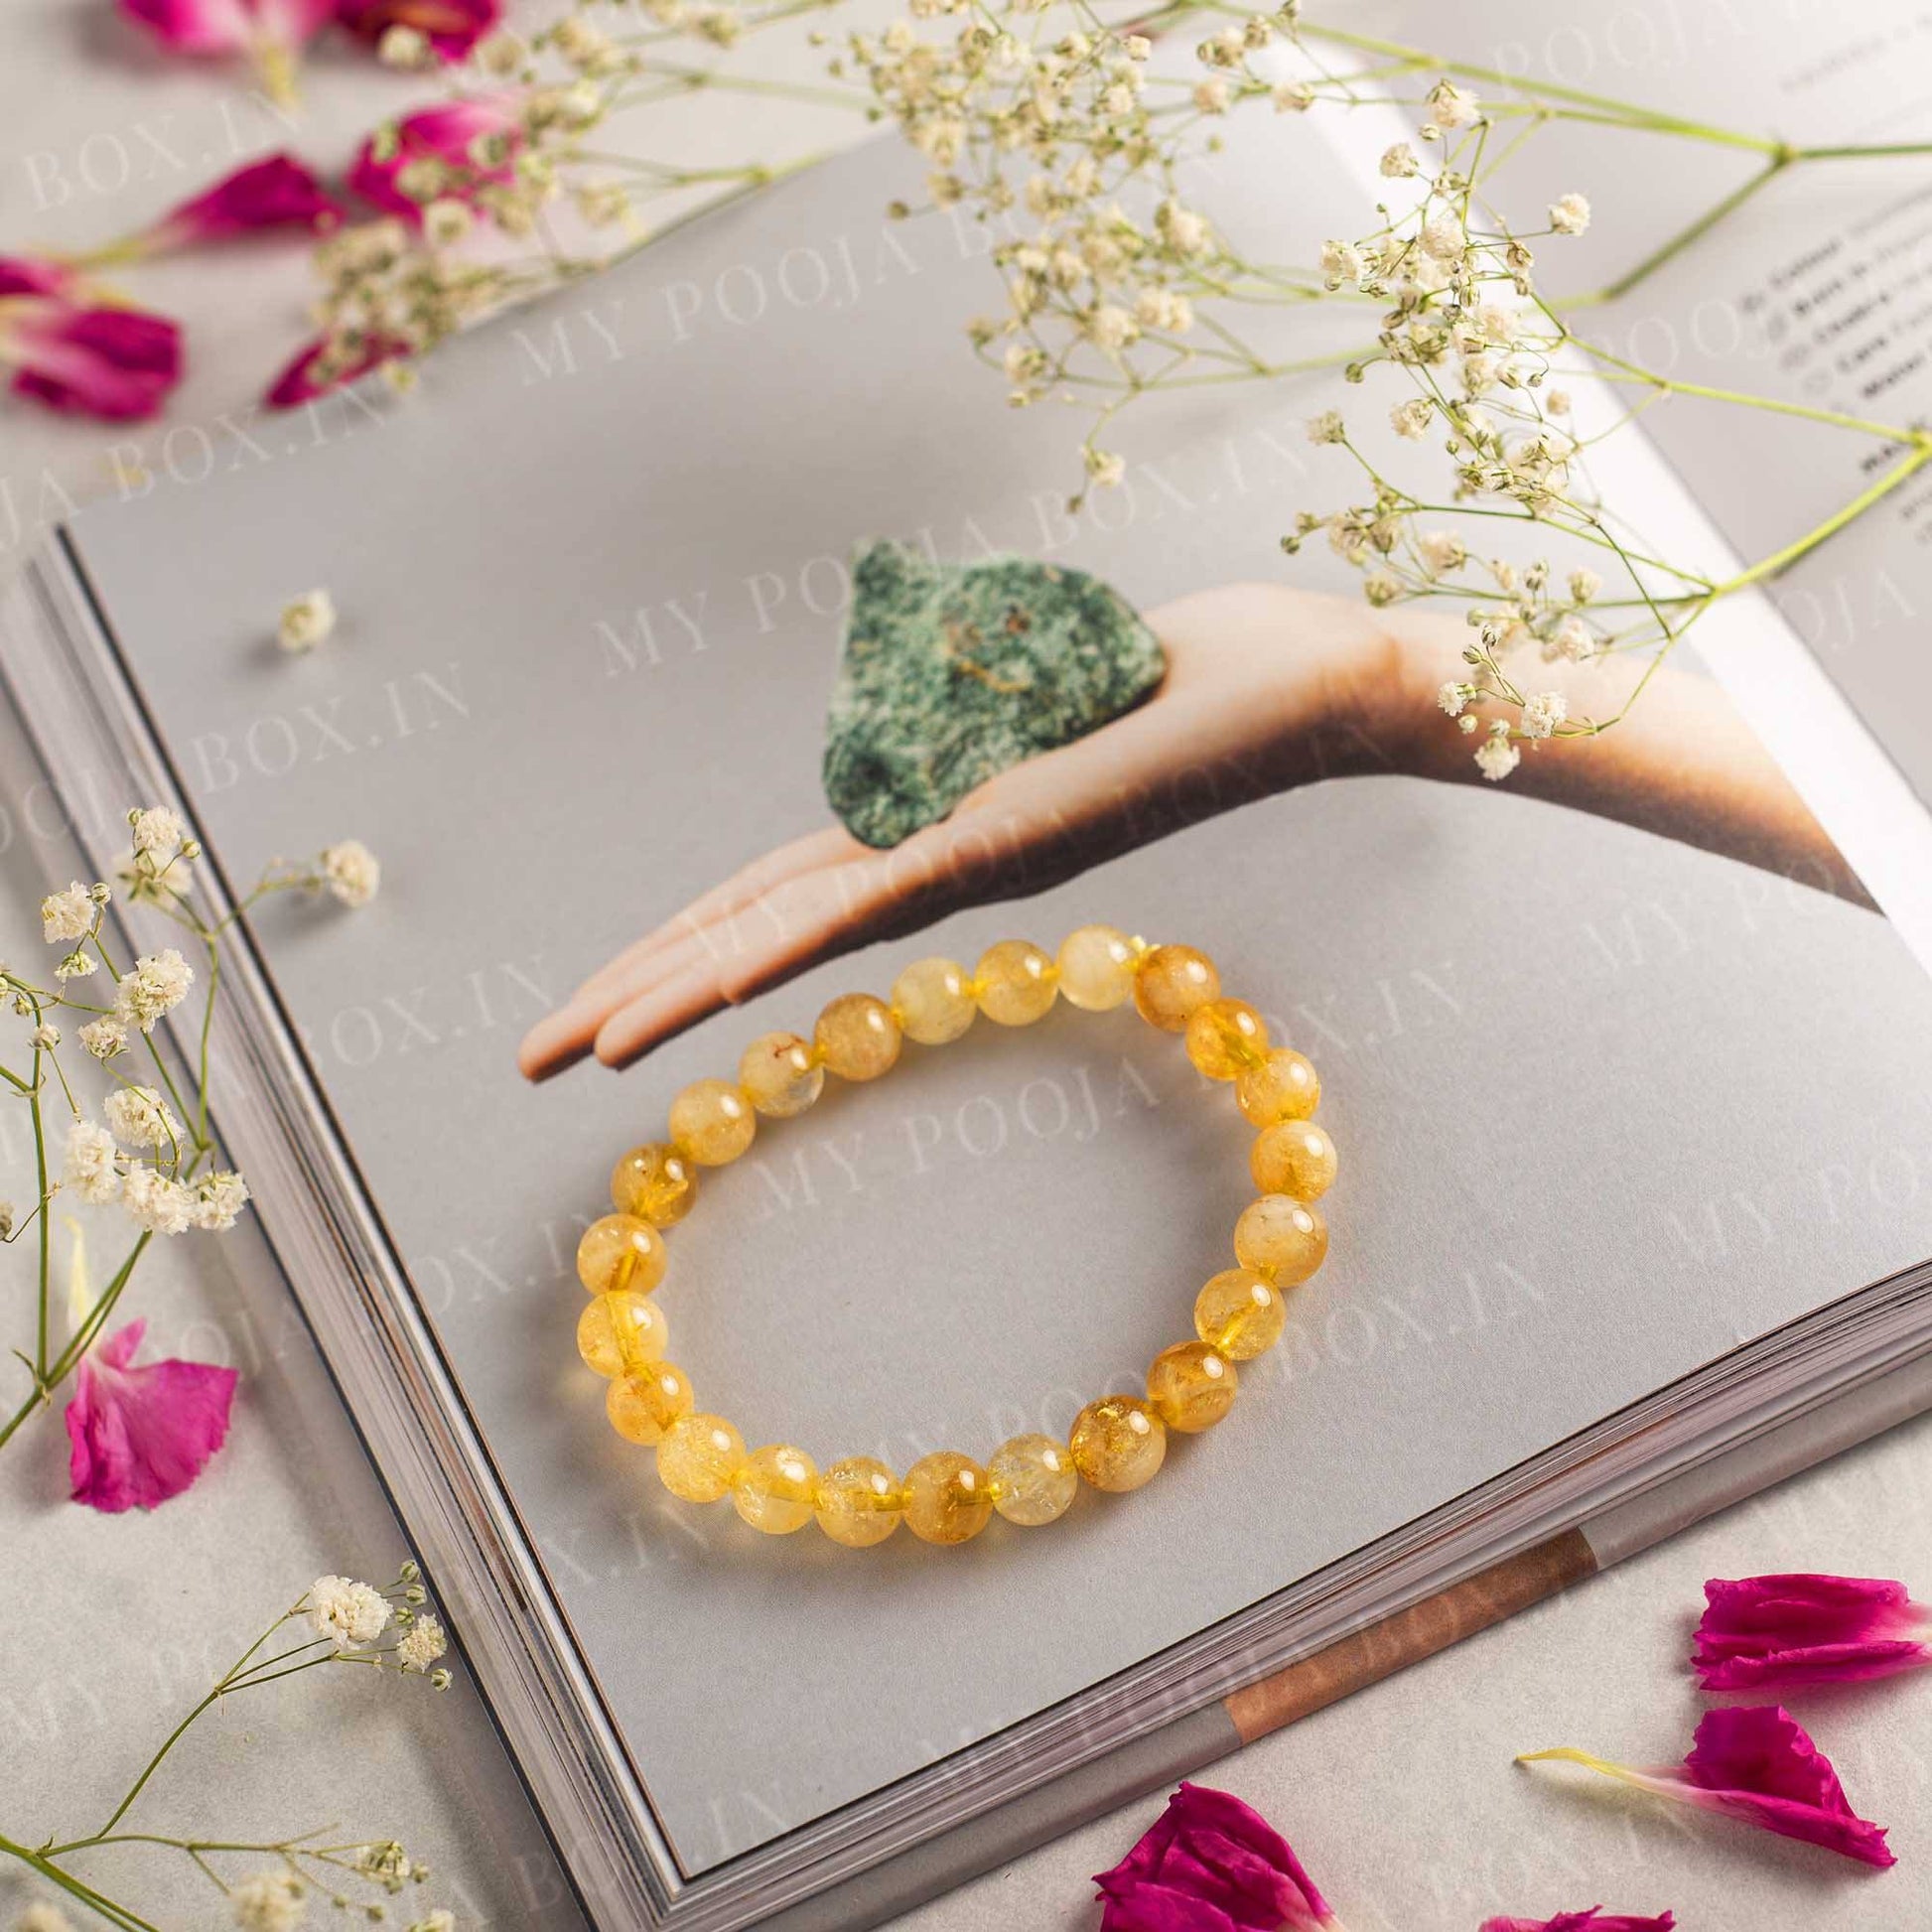 Buy REMEDYWALA Charged Citrine Tumbled Stone Bracelet at Amazon.in